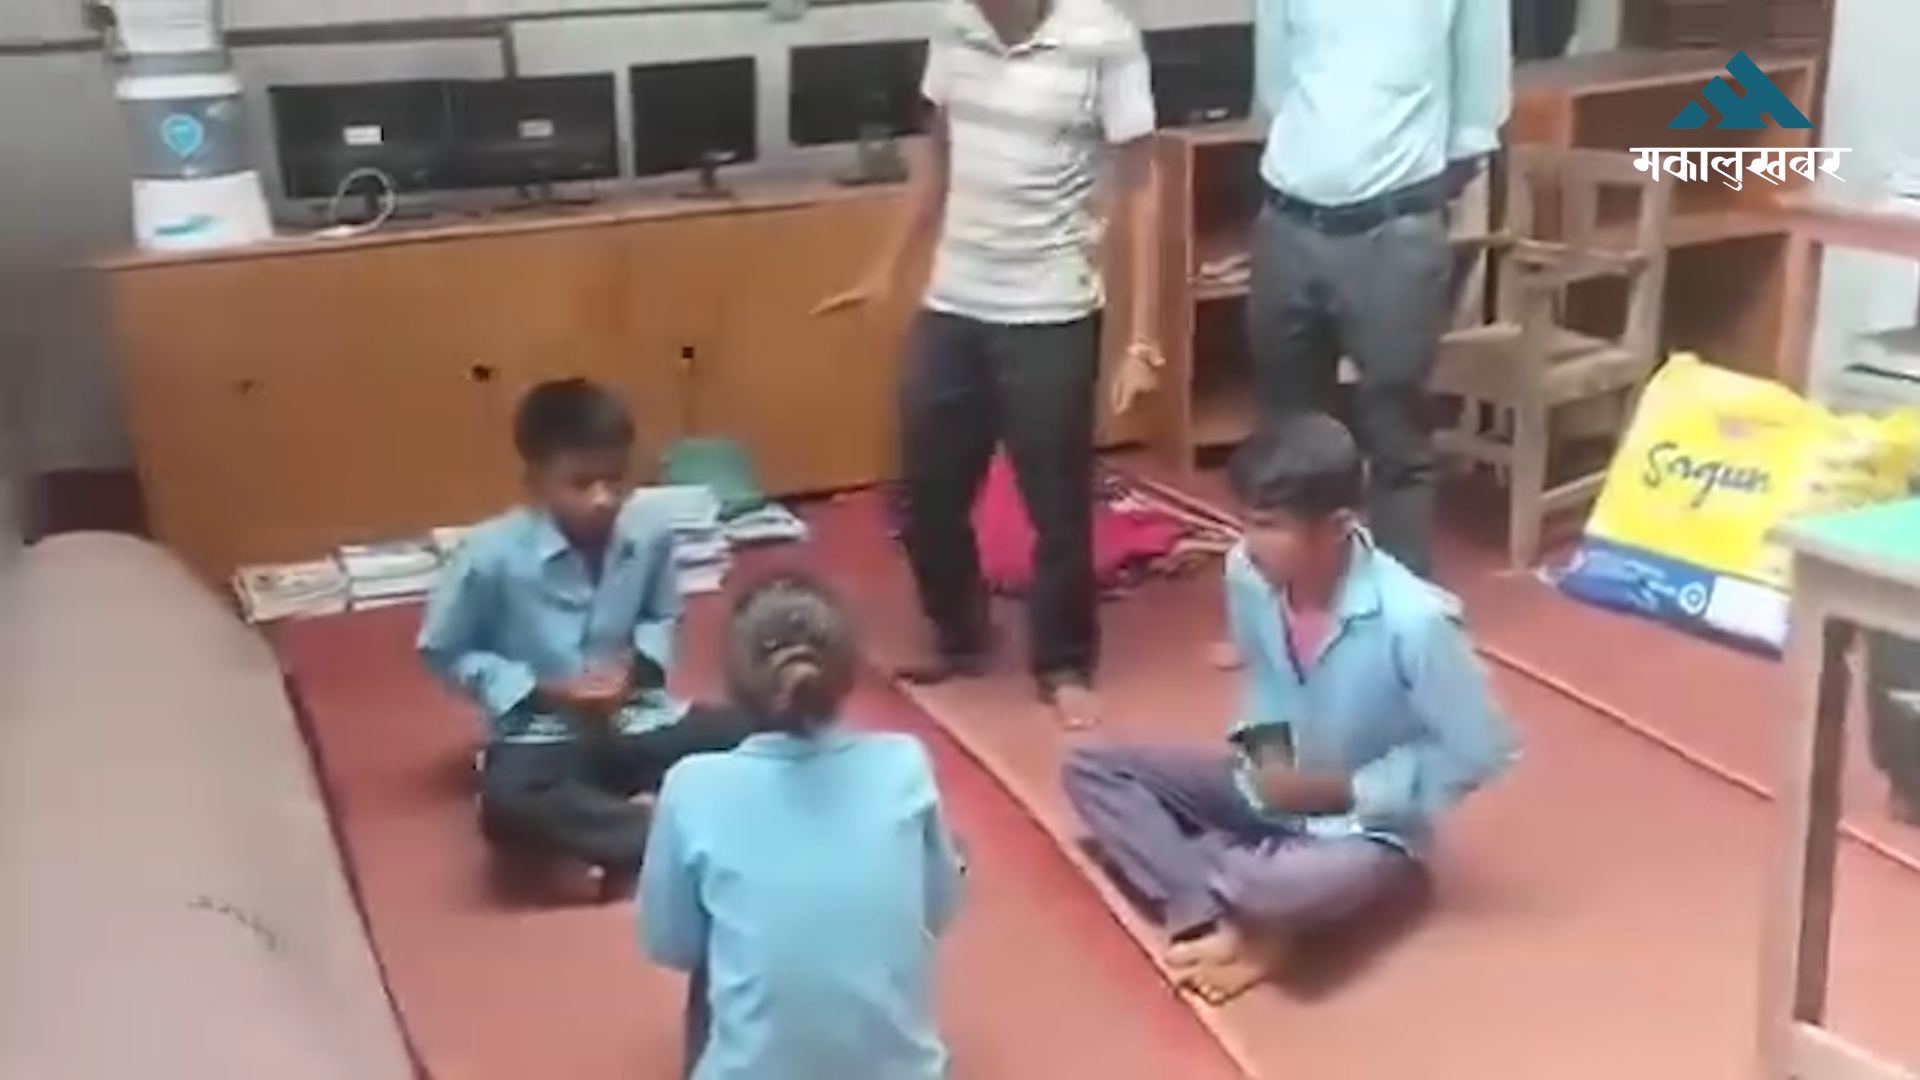 Controversy erupts as school video reveals students performing shaman